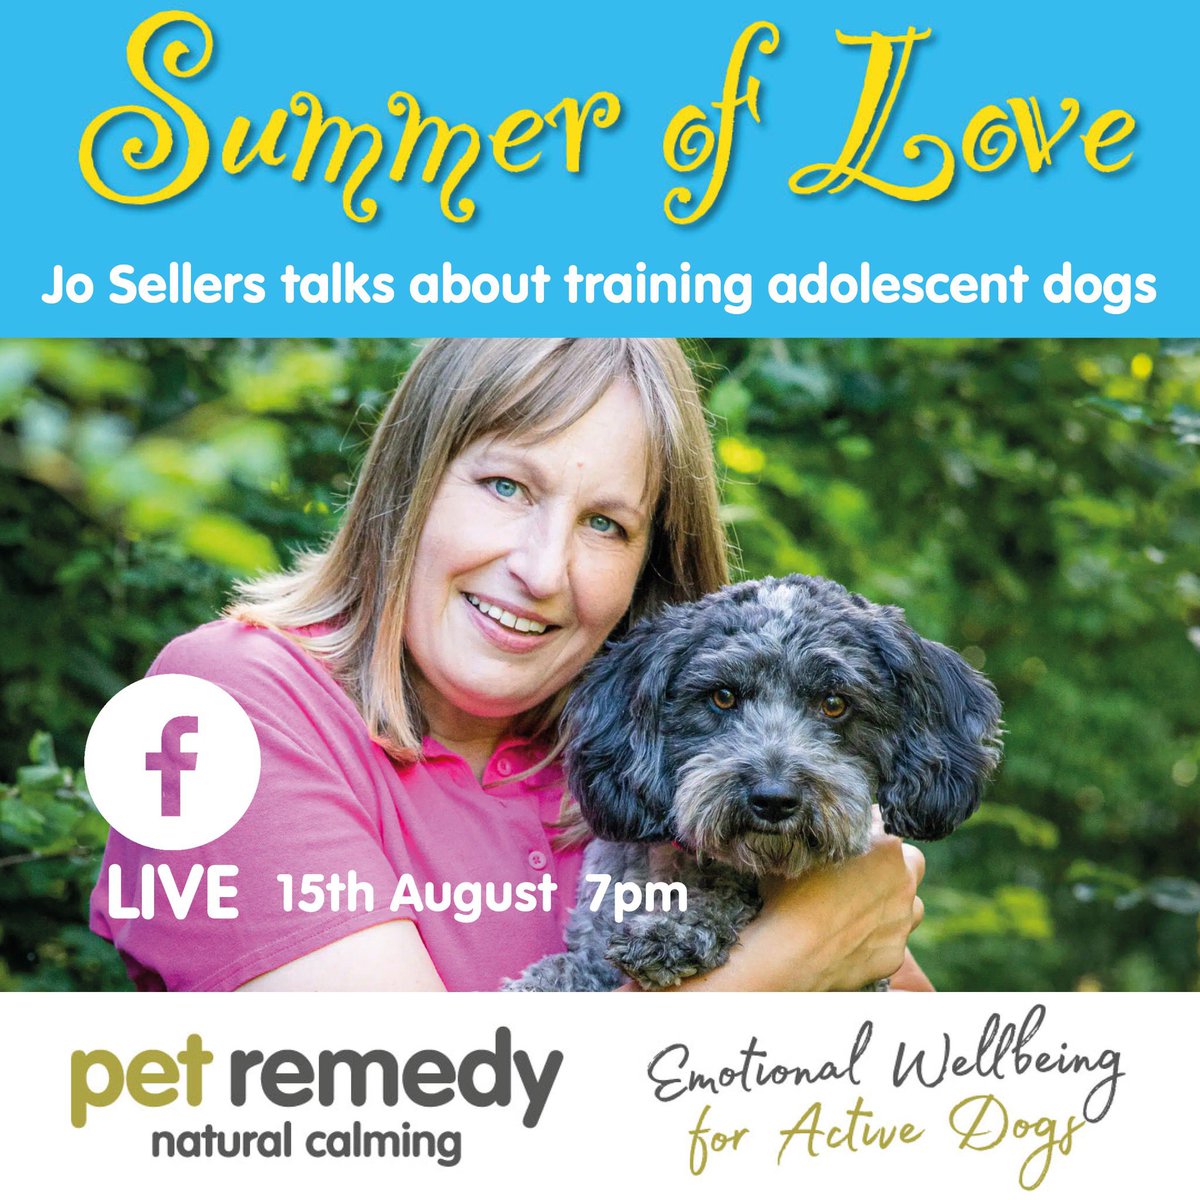 Facebook Live - Jo Sellers talks about Training Adolescent Dogs with Andrew Hale – Tuesday 15th August @ 7pm If you feel like your adorable puppy has turned into a rebellious teenager, Jo Sellers has advice for you! #PetRemedySOL